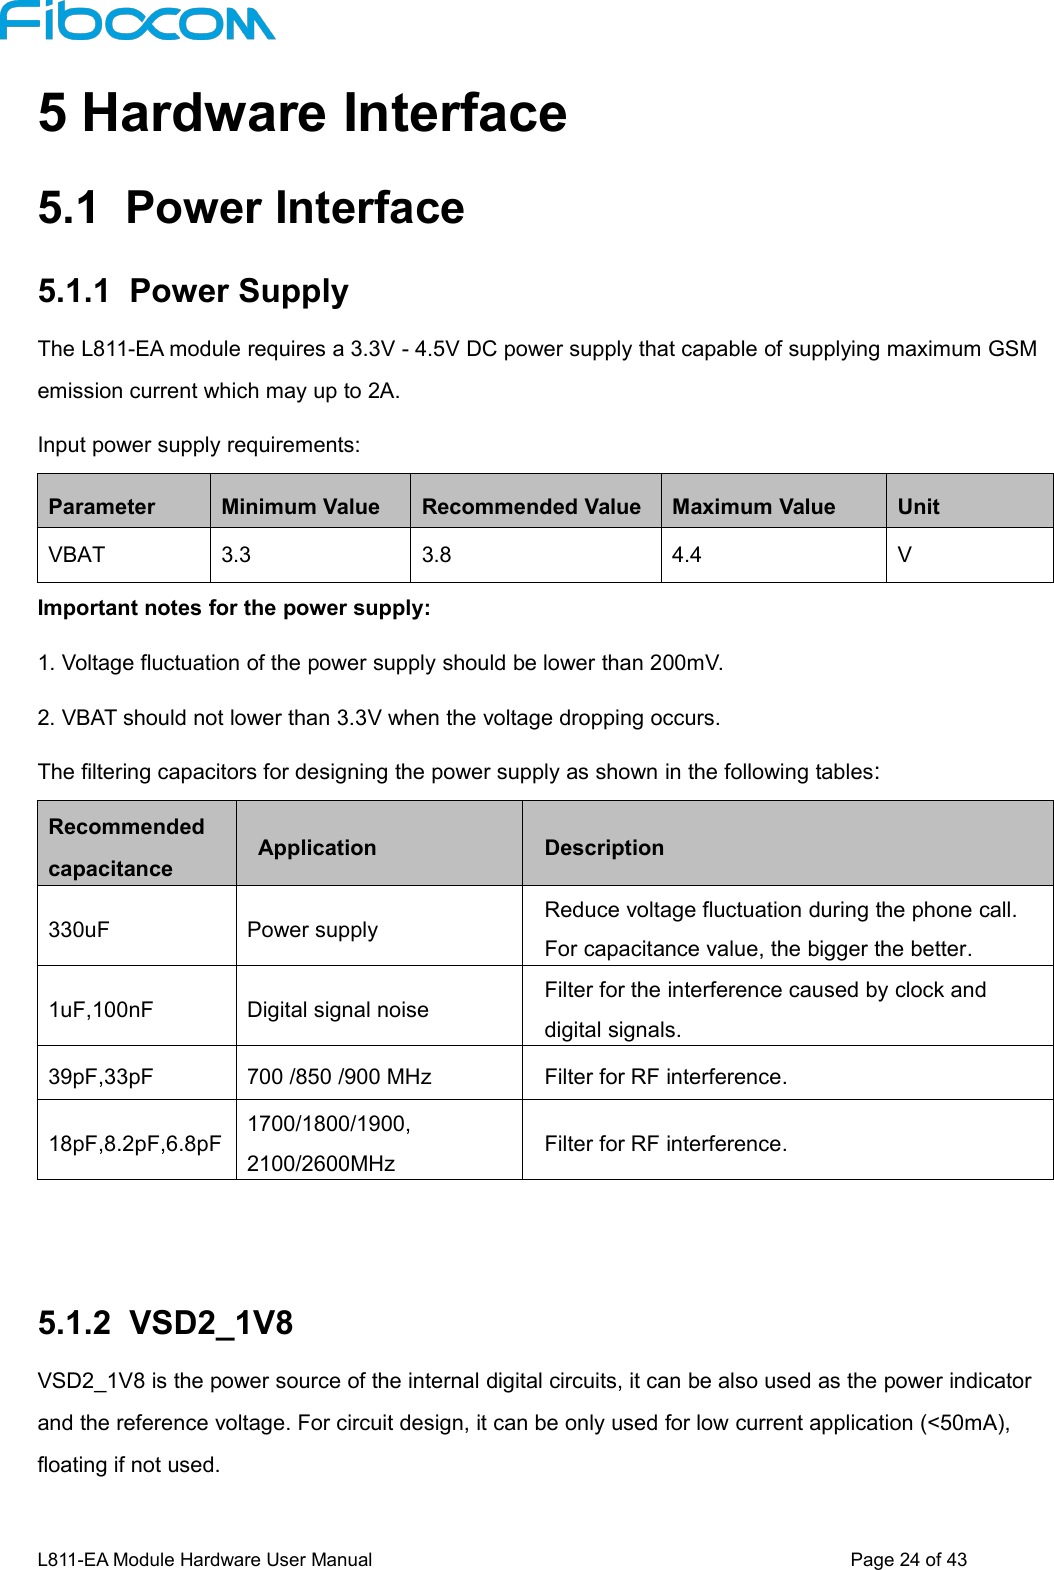 L811-EA Module Hardware User Manual Page24of435 Hardware Interface5.1 Power Interface5.1.1 Power SupplyThe L811-EA module requires a 3.3V - 4.5V DC power supply that capable of supplying maximum GSMemission current which may up to 2A.Input power supply requirements:ParameterMinimum ValueRecommended ValueMaximum ValueUnitVBAT3.33.84.4VImportant notes for the power supply:1. Voltage fluctuation of the power supply should be lower than 200mV.2. VBAT should not lower than 3.3V when the voltage dropping occurs.The filtering capacitors for designing the power supply as shown in the following tables:RecommendedcapacitanceApplicationDescription330uFPower supplyReduce voltage fluctuation during the phone call.For capacitance value, the bigger the better.1uF,100nFDigital signal noiseFilter for the interference caused by clock anddigital signals.39pF,33pF700 /850 /900 MHzFilter for RF interference.18pF,8.2pF,6.8pF1700/1800/1900,2100/2600MHzFilter for RF interference.5.1.2 VSD2_1V8VSD2_1V8 is the power source of the internal digital circuits, it can be also used as the power indicatorand the reference voltage. For circuit design, it can be only used for low current application (&lt;50mA),floating if not used.